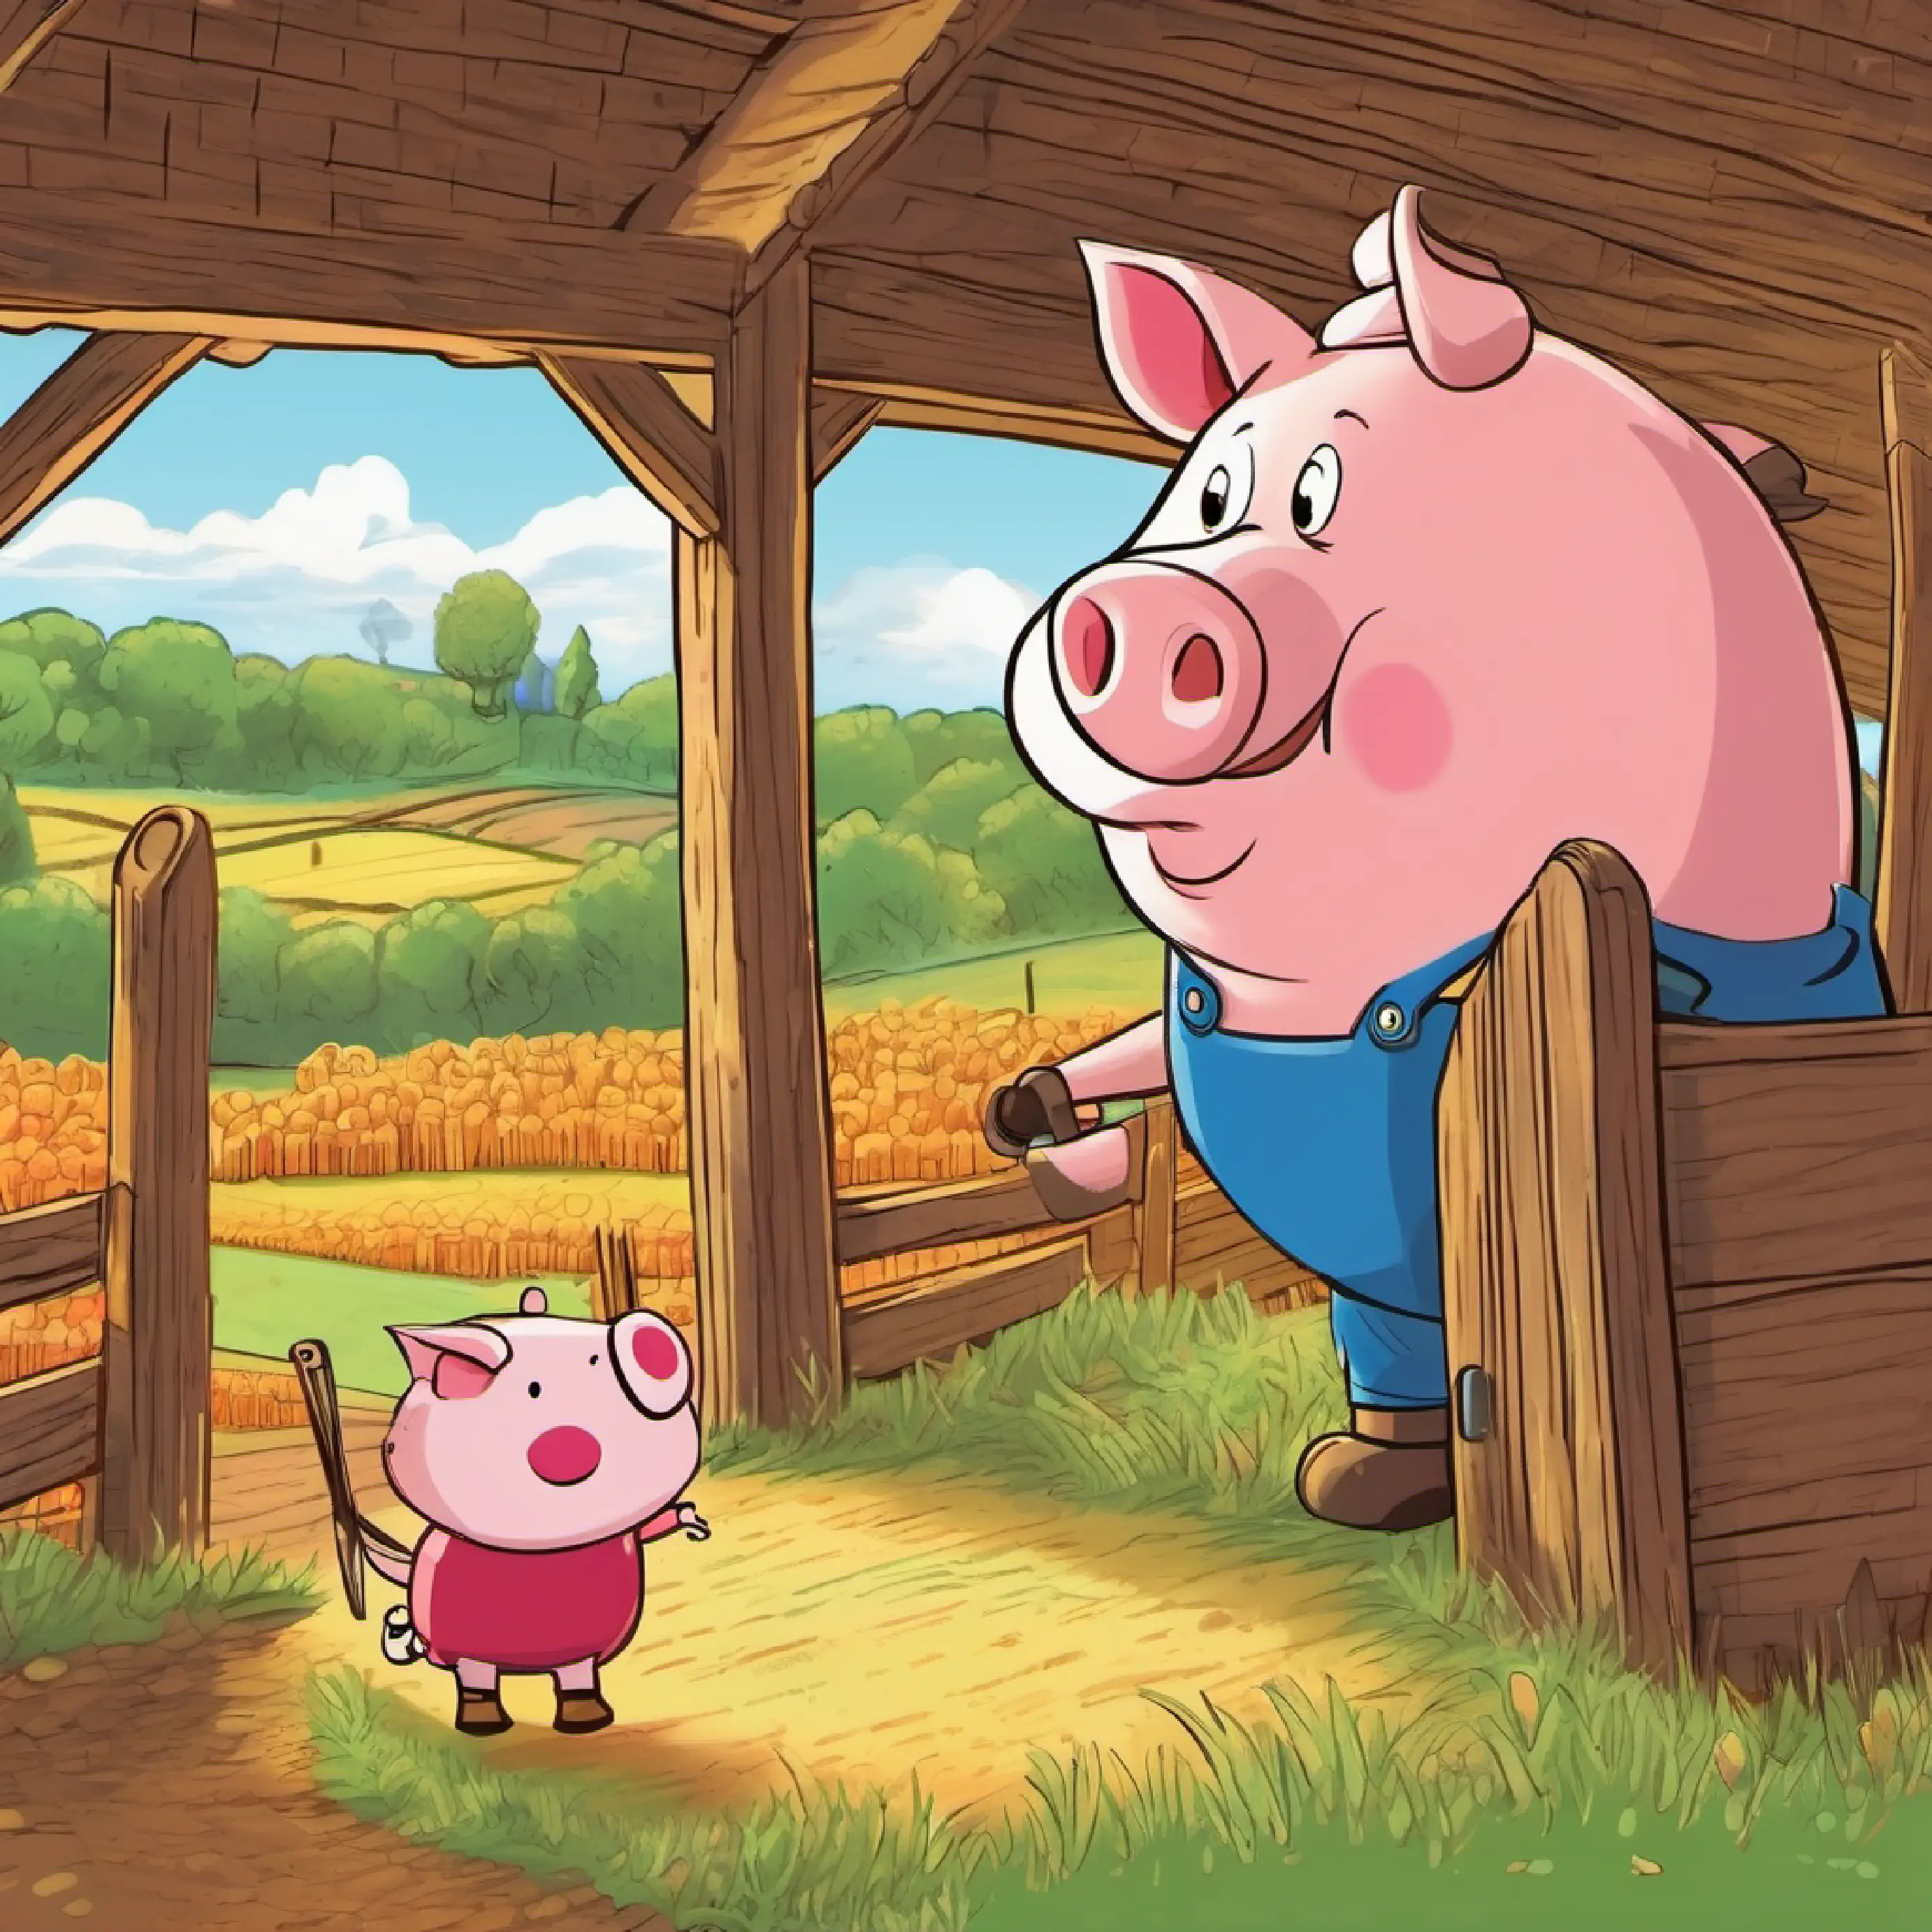 Piggy returns to the barn, learning a lesson.